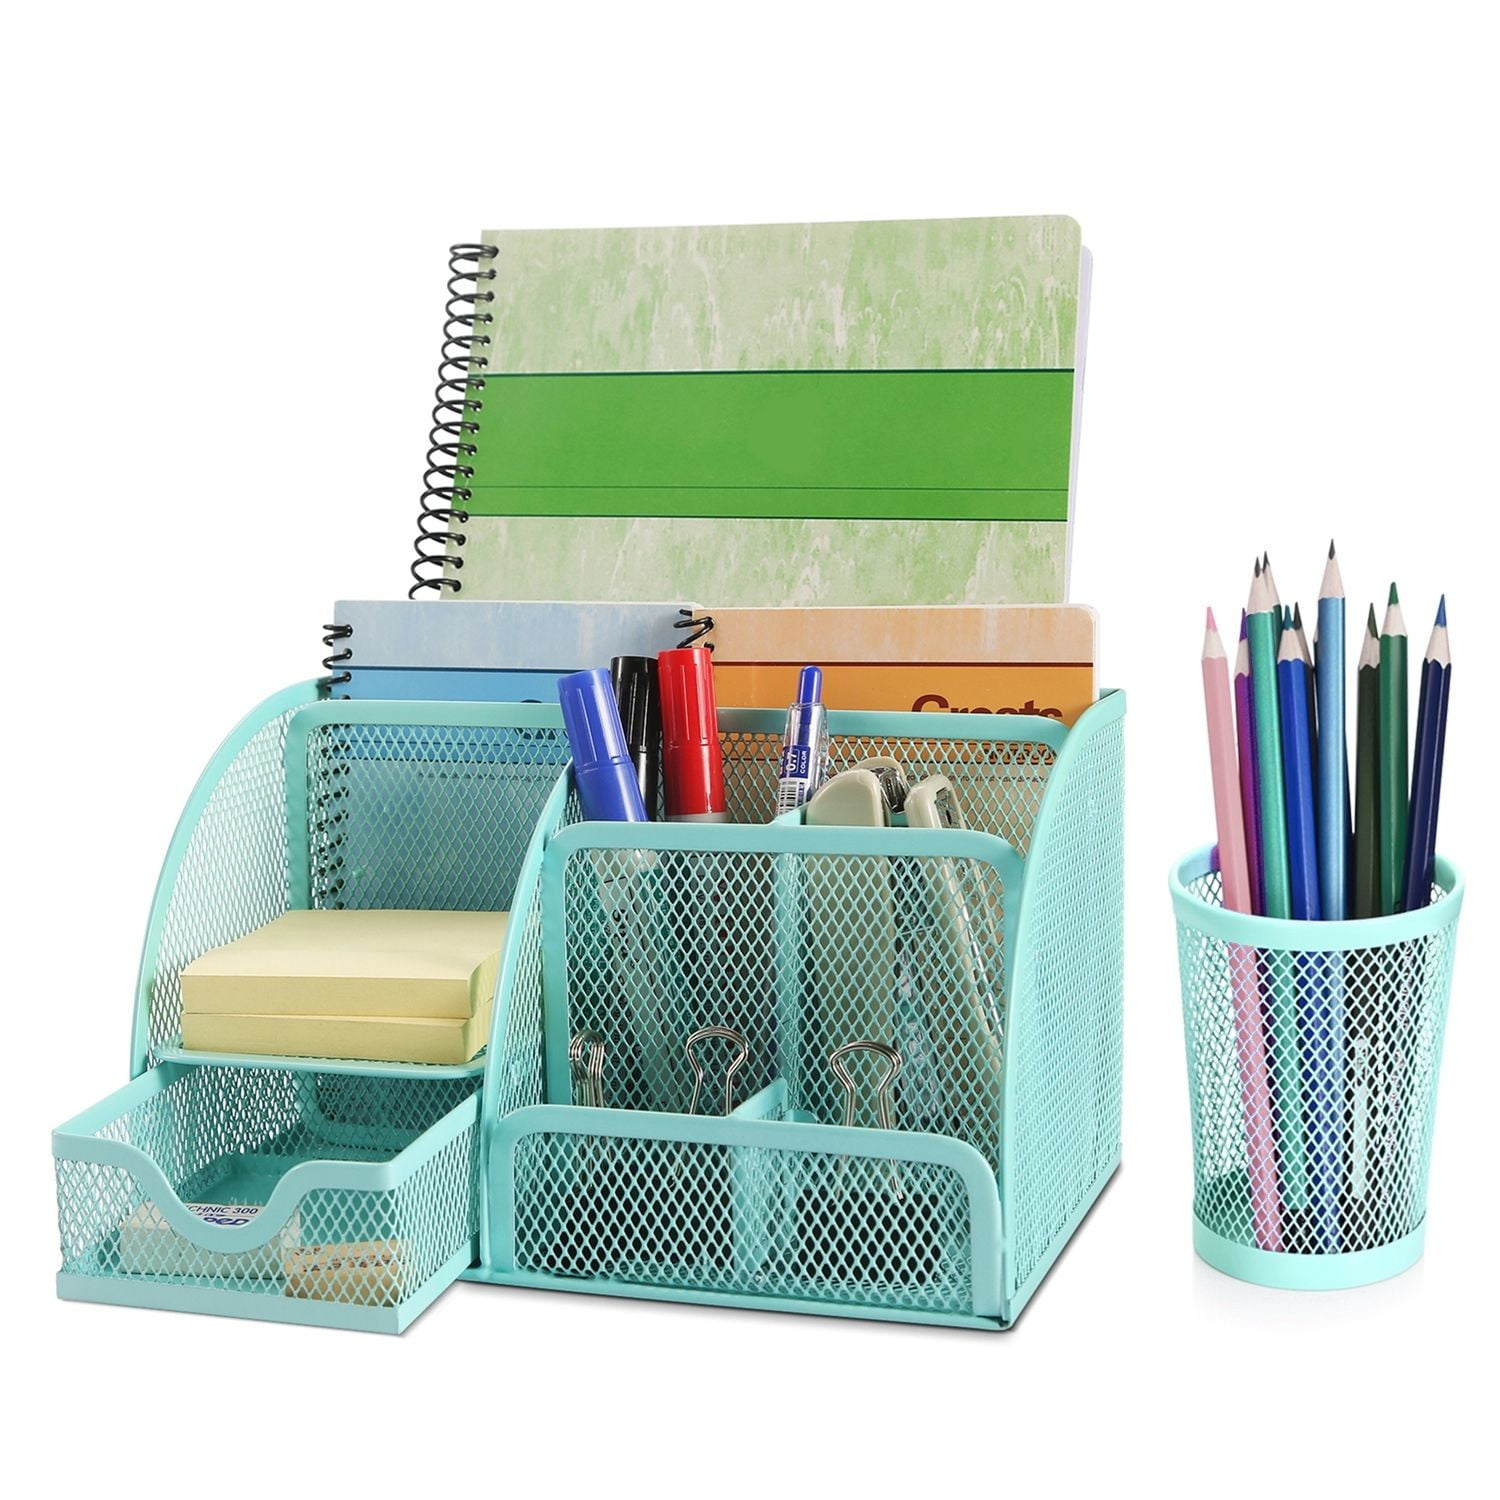 Flexzion Desk Organizer Office Supplies Accessories Desktop Tabletop Sorter Shelf Pencil Holder Caddy Set - Metal Mesh with Drawer and 6 Compartments